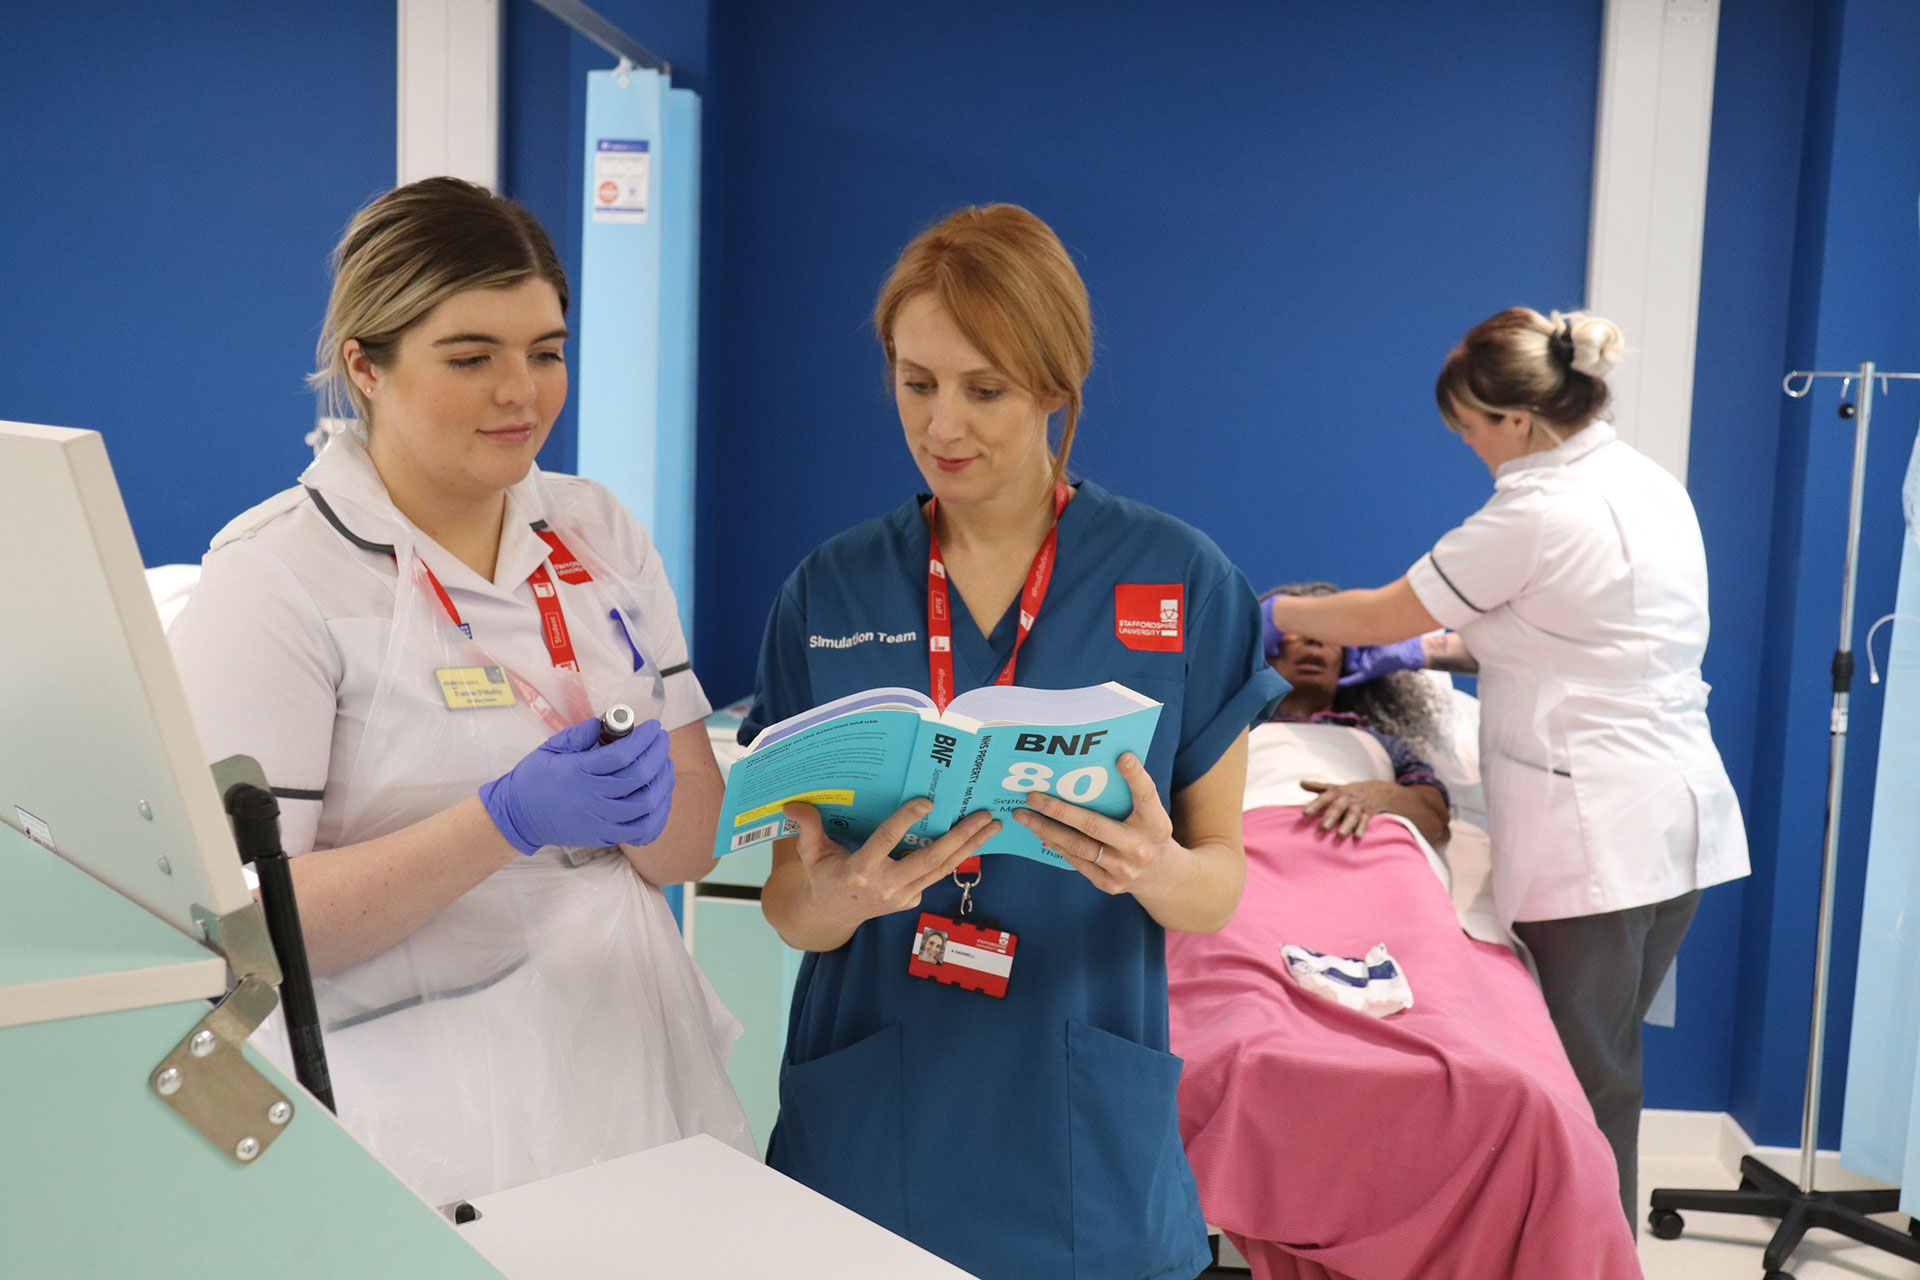 A technician looking at a drugs manual with a student, with another student nurse in the background tending to a manikin.